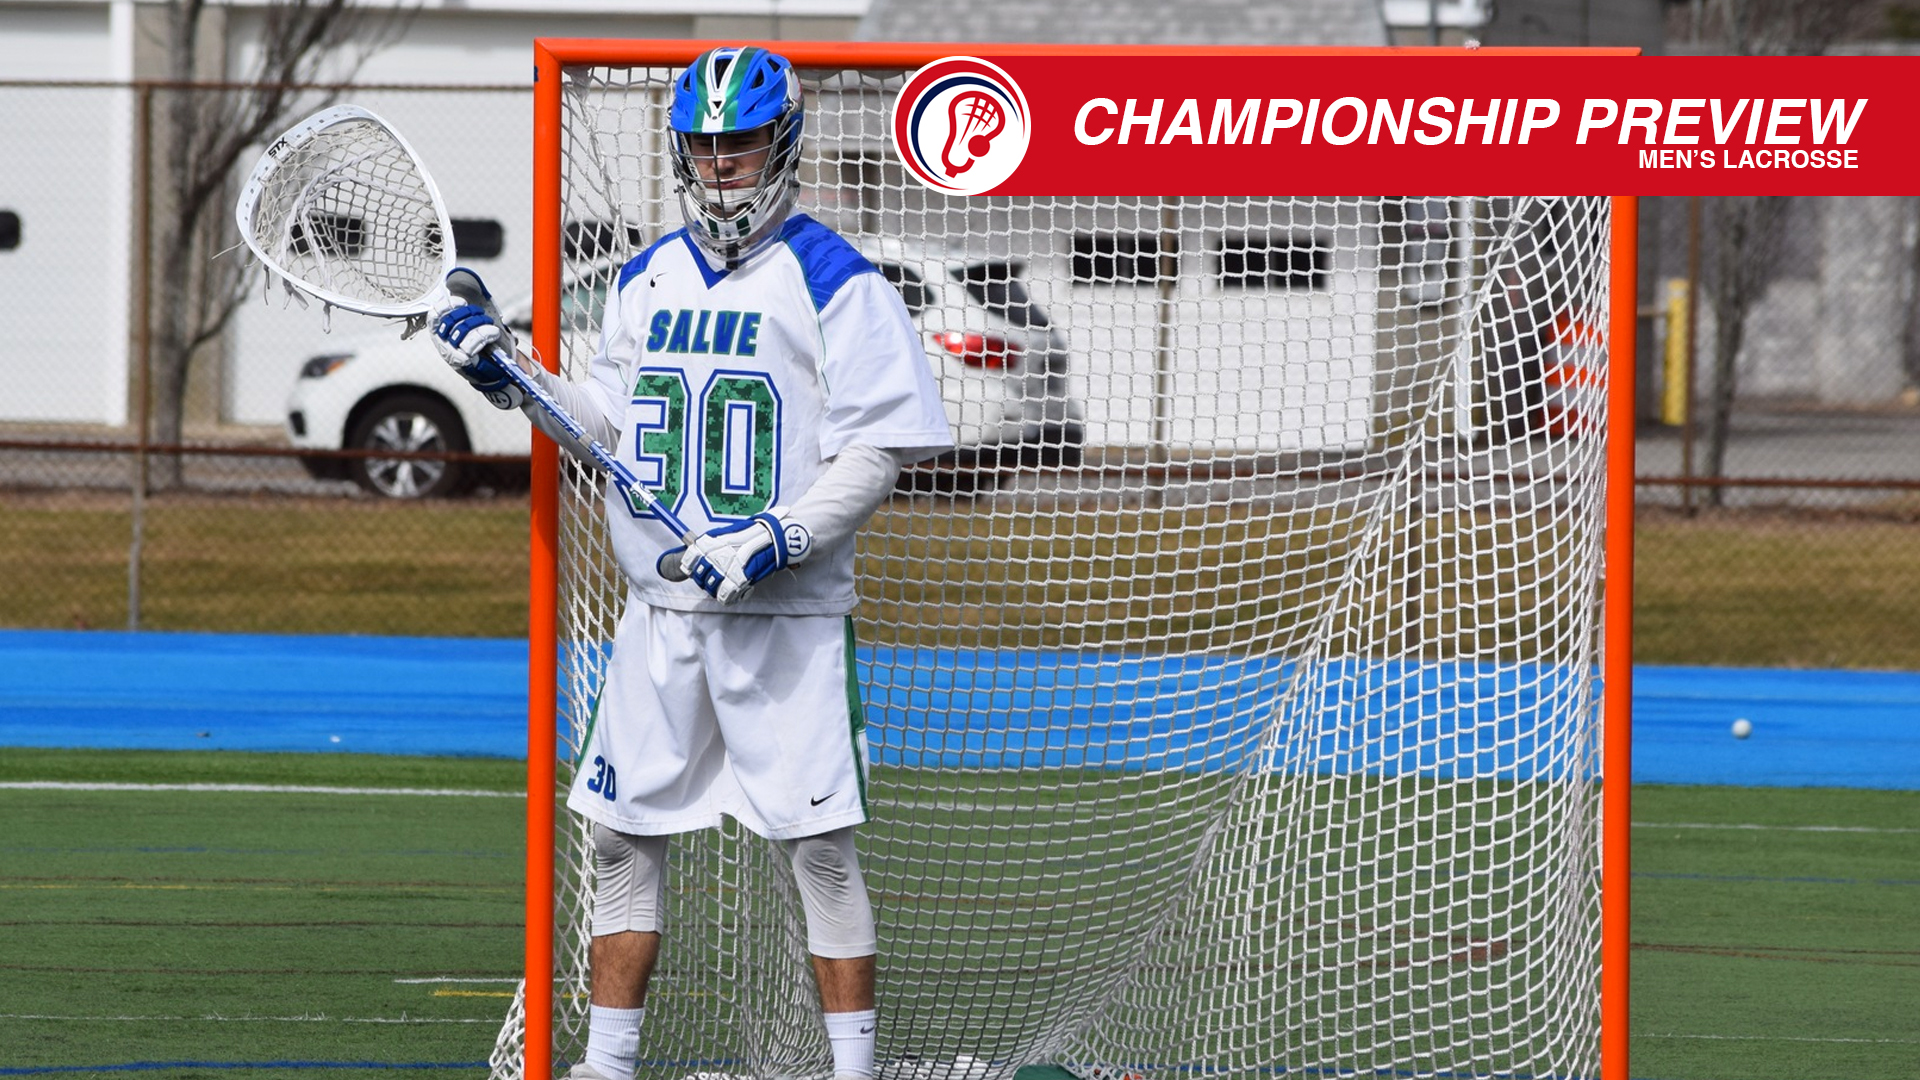 Senior netminder Matt D'Amore will look for a program record 35th career win when the Seahawks take on the Golden Bears in the CCC semifinals.